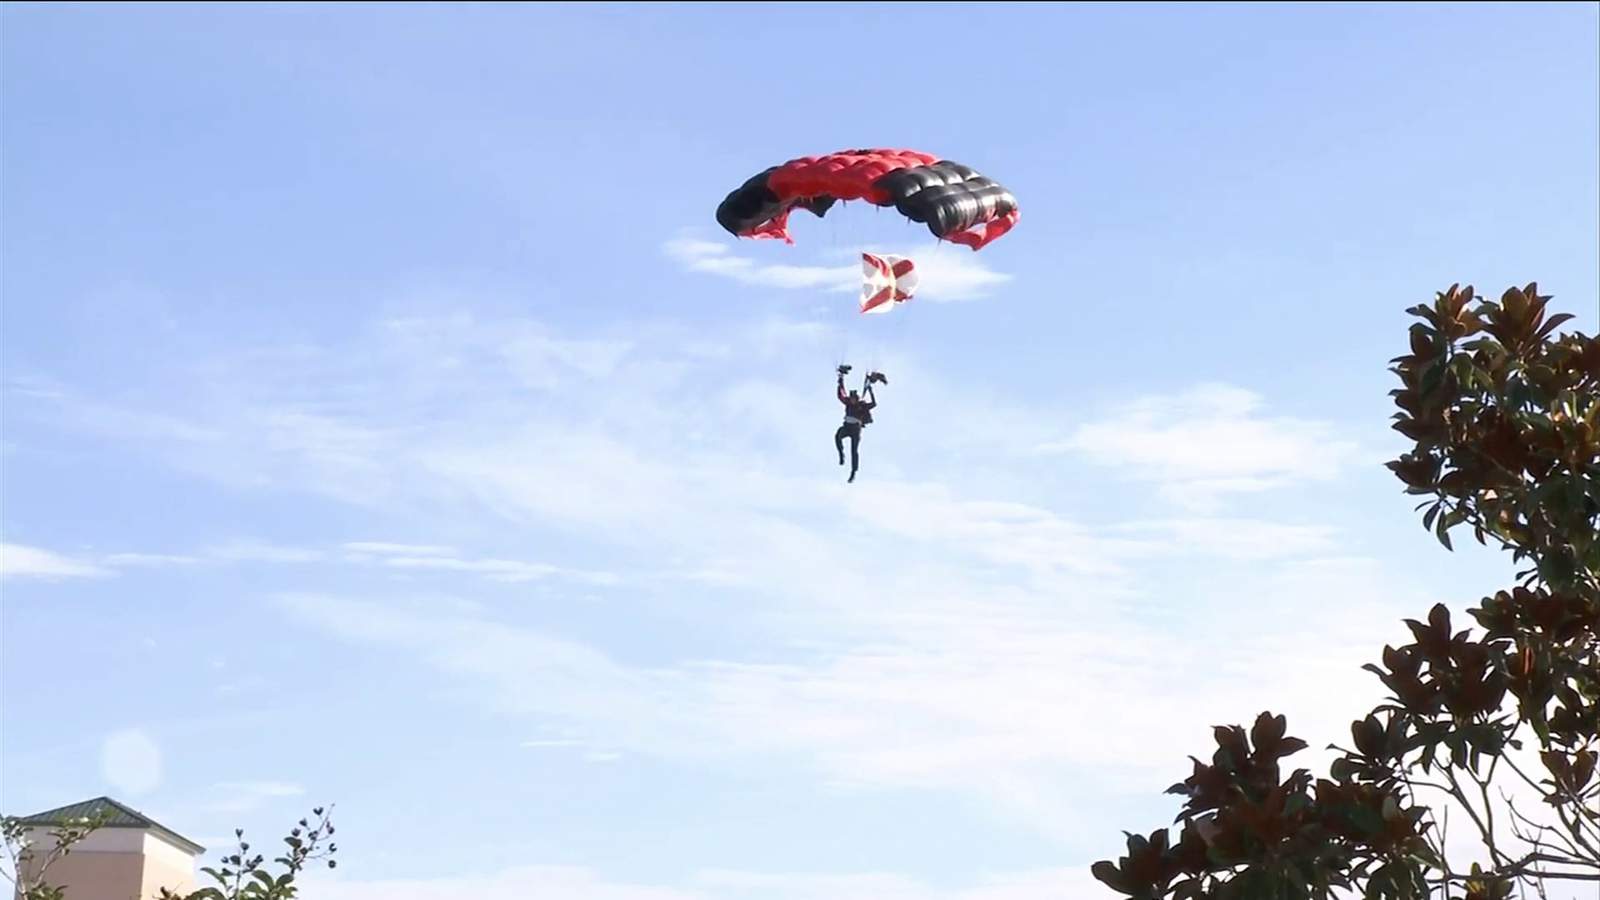 Special Salute: Army parachute team honors health care workers during pandemic